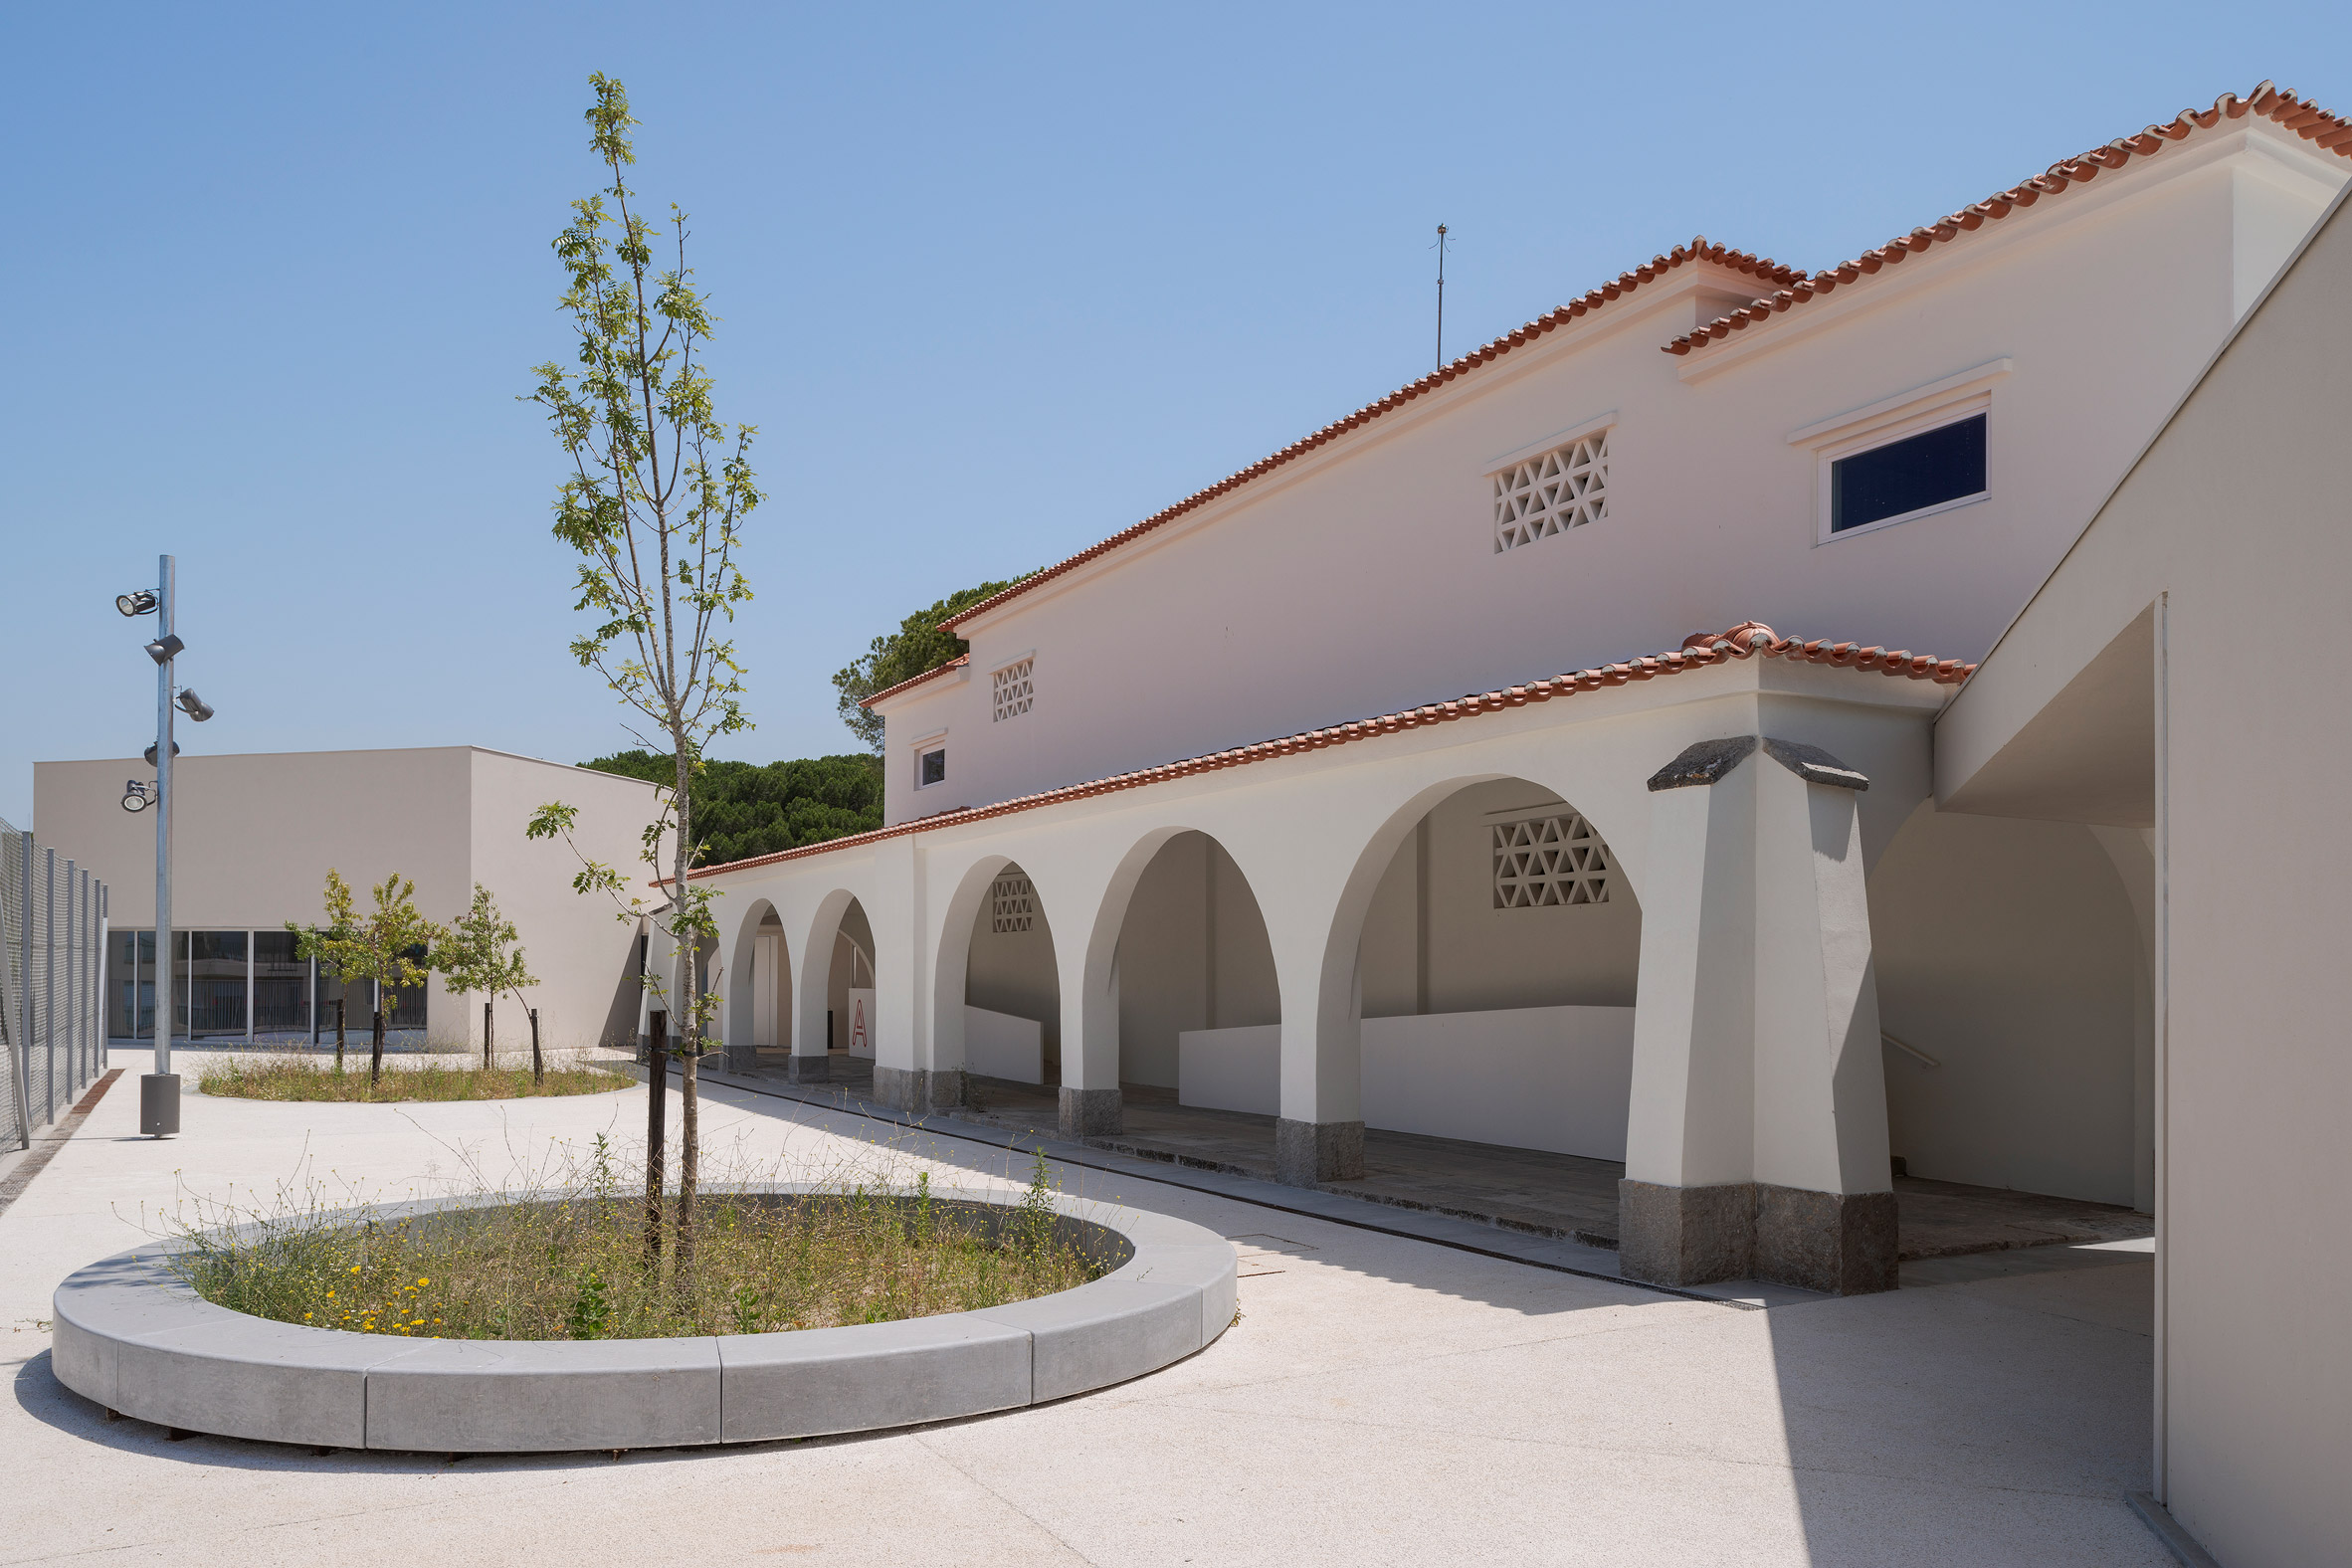 Site Specific Arquitectura added an extension to a 1950s school in Caselas, Lisbon